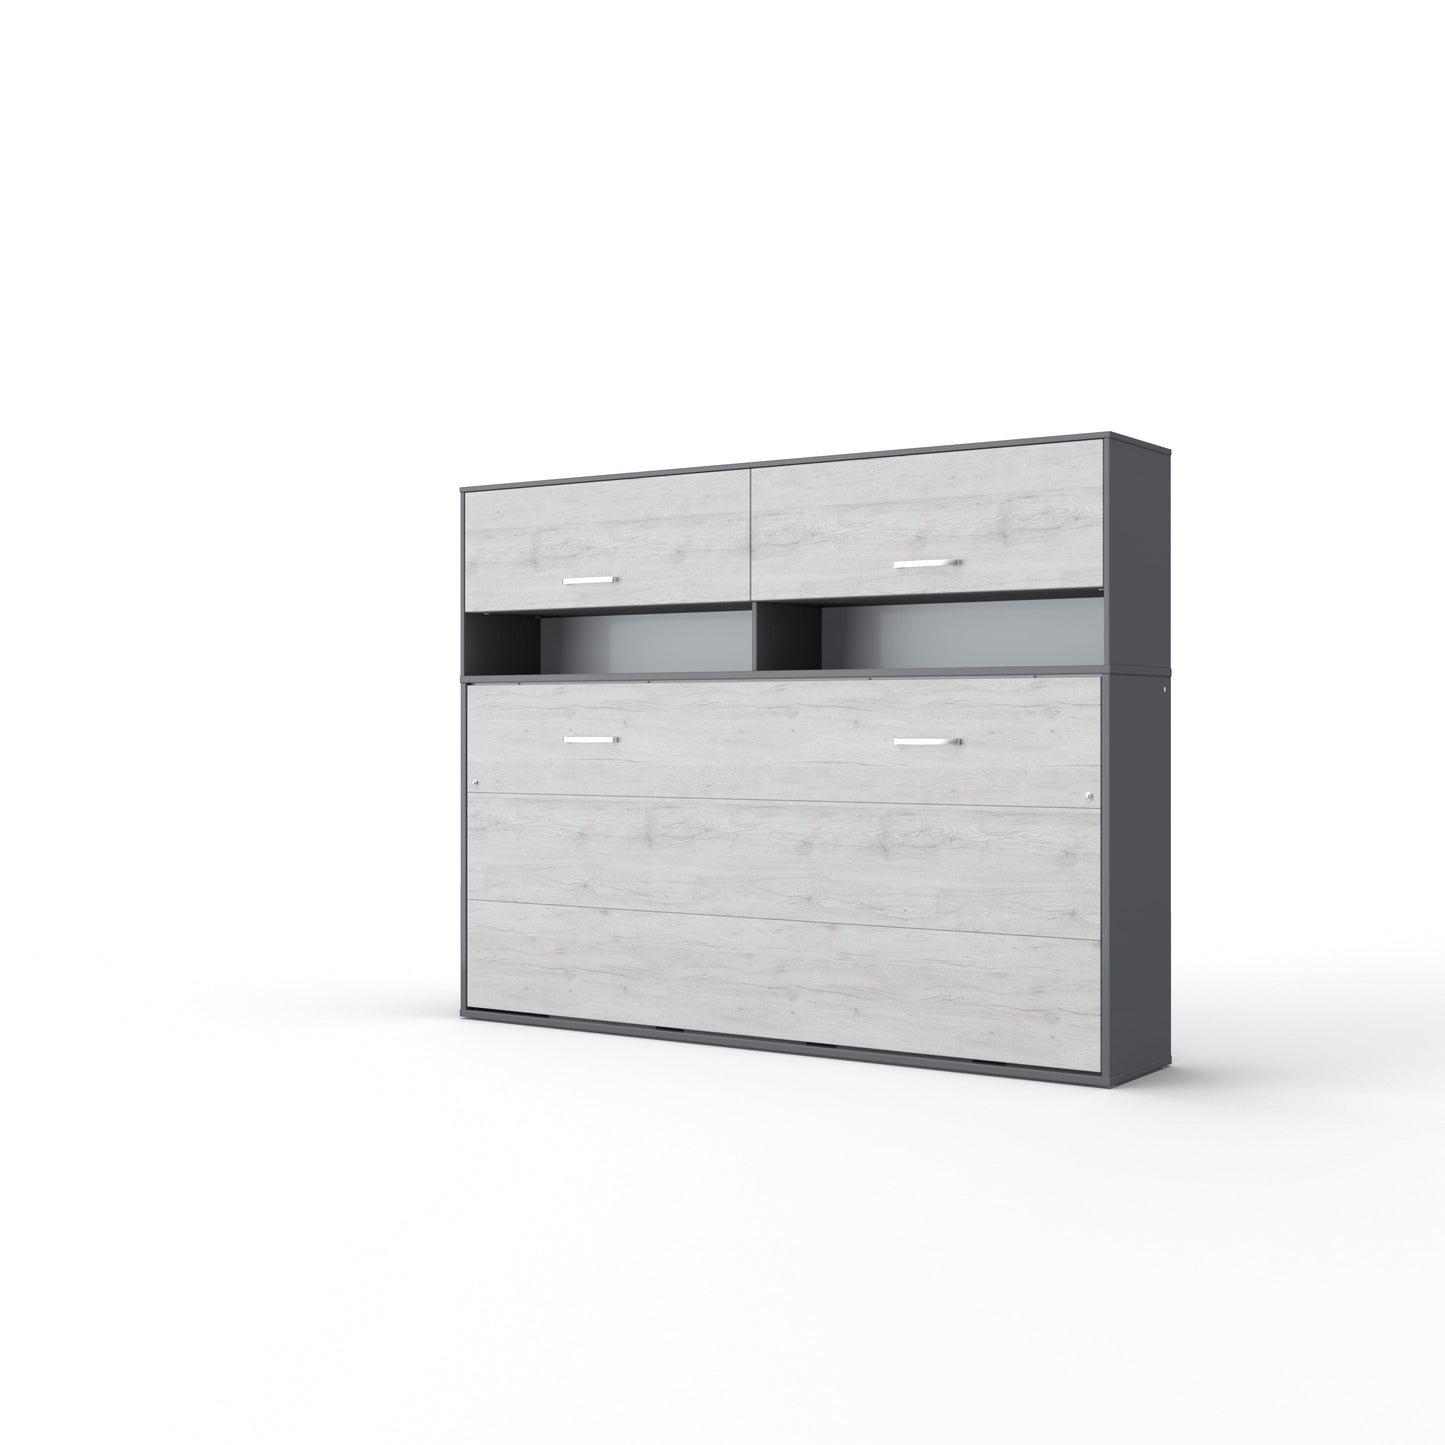 Invento Horizontal Wall Bed, European Full XL Size with a cabinet on top